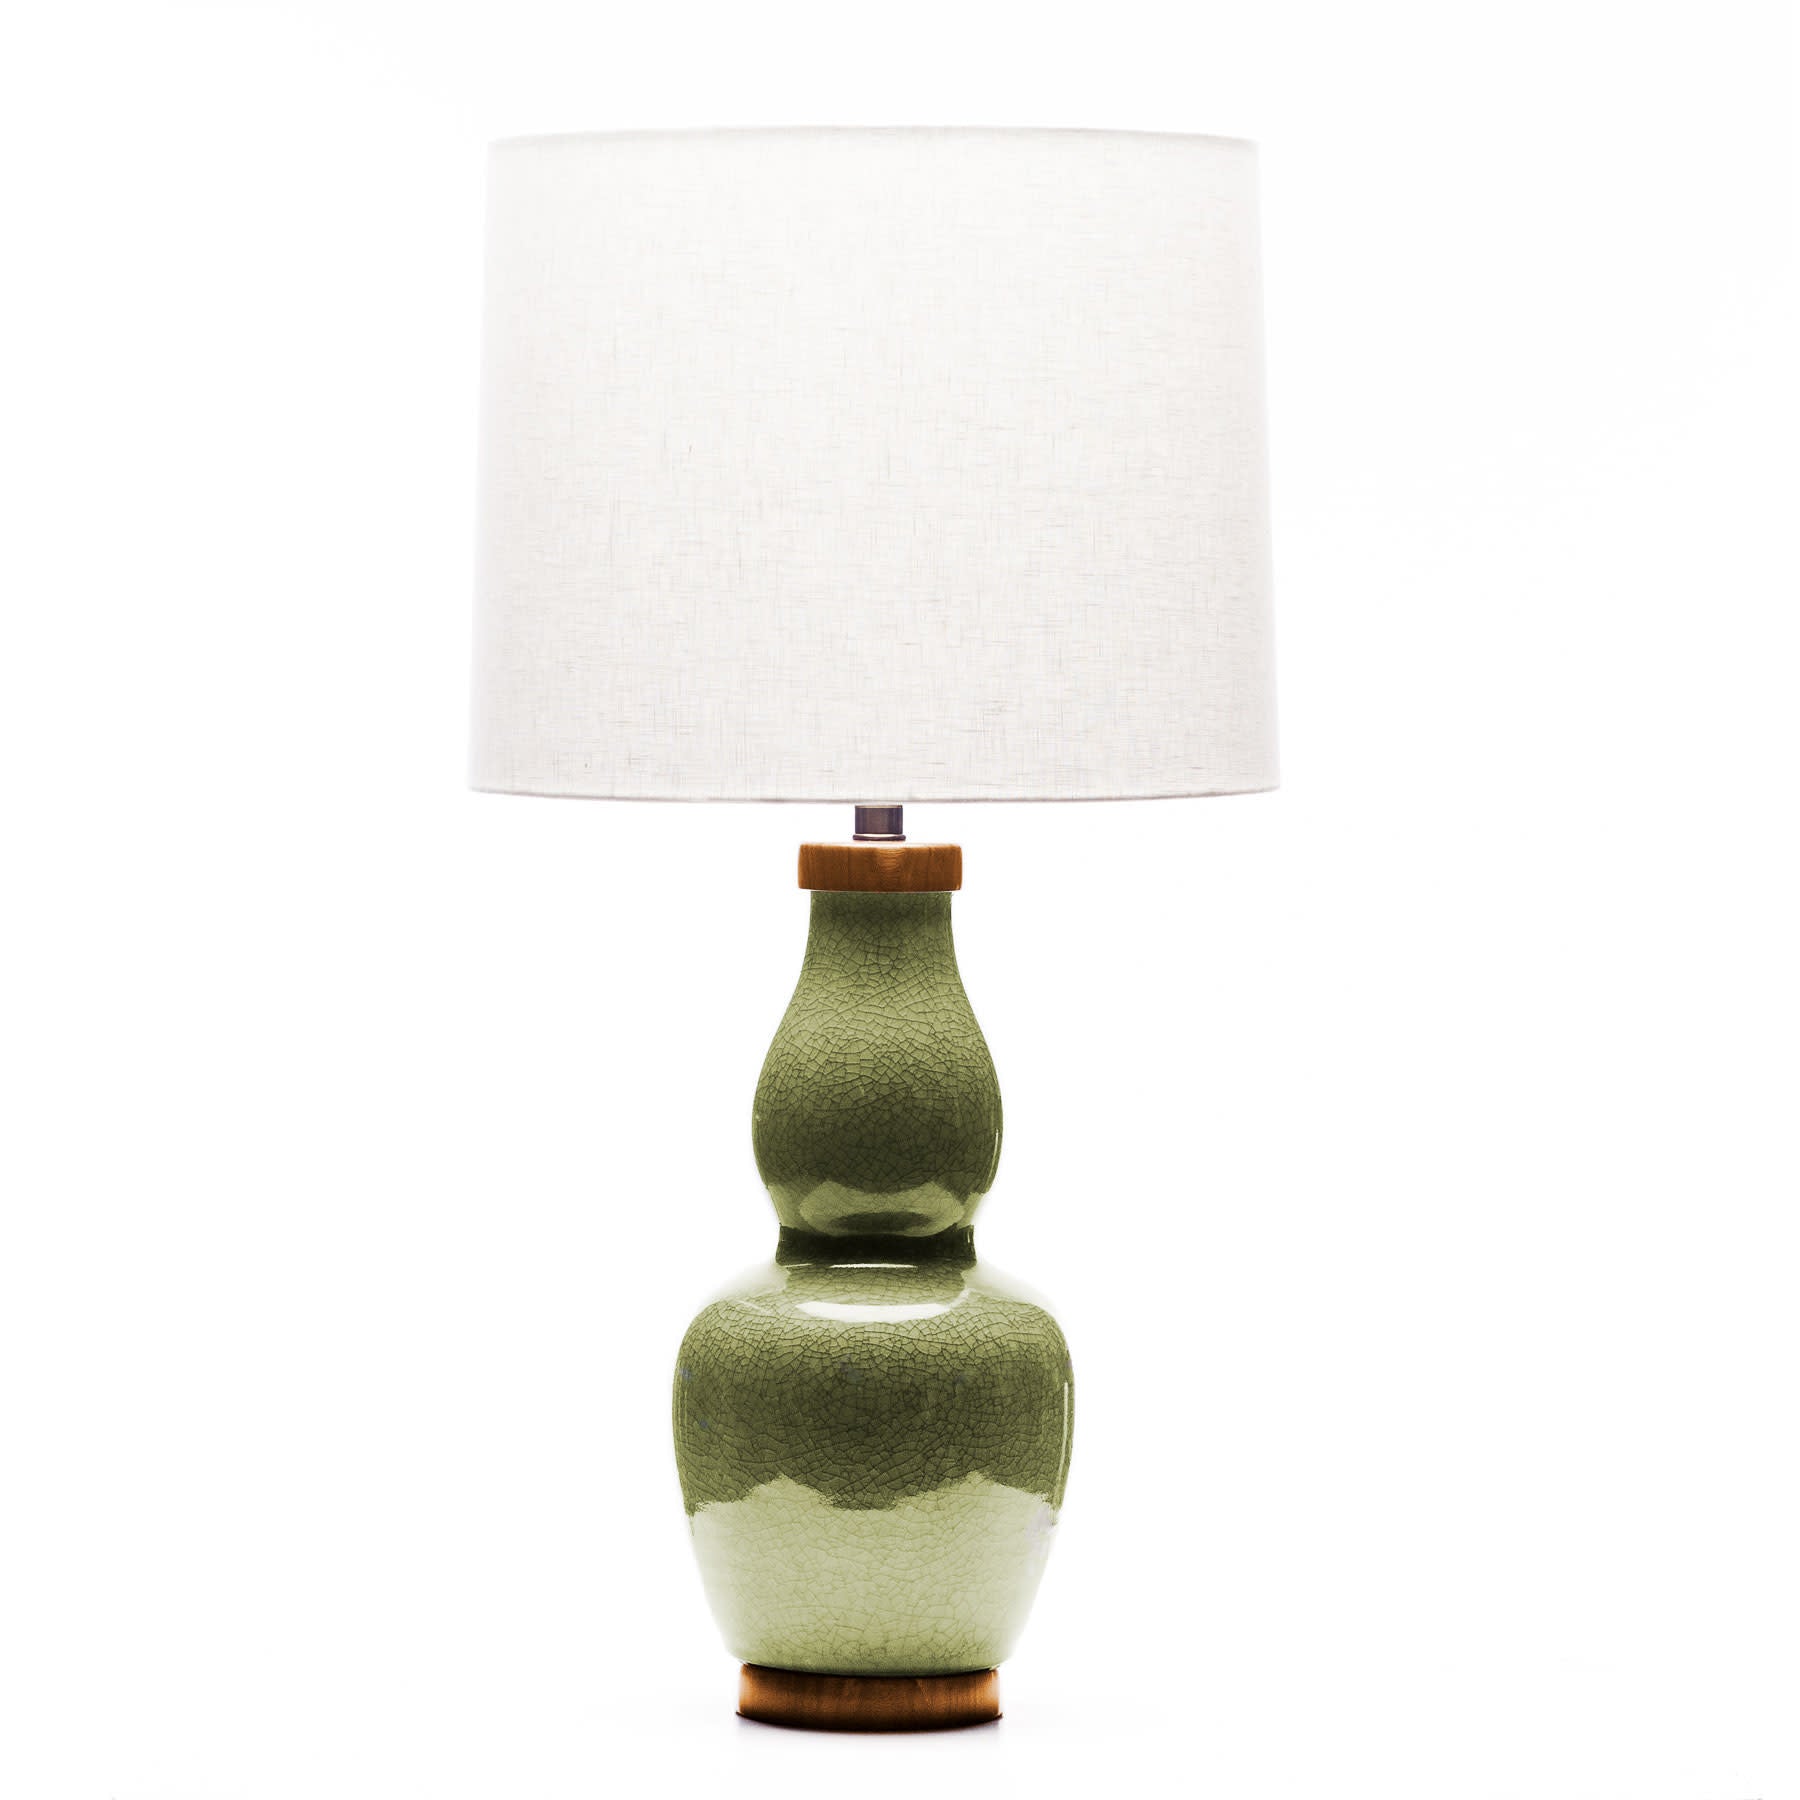 Lawrence & Scott Scarlett Table Lamp in Celadon Crackle with Sapele Base